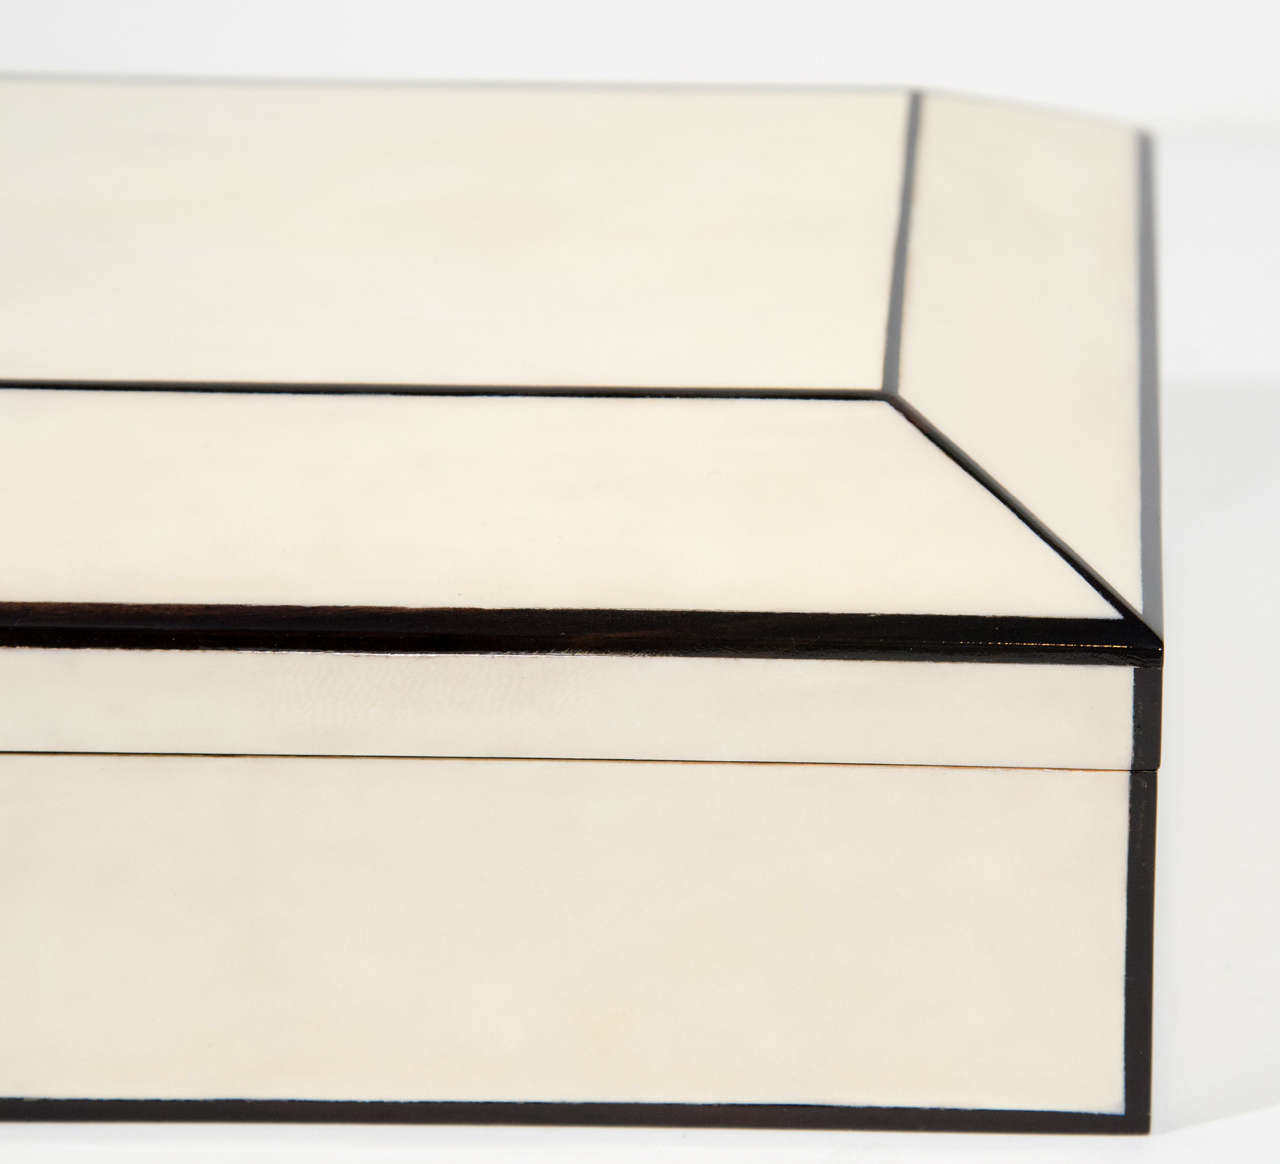 American Creme Lacquered Parchment Box with Ebonized Wood Trim